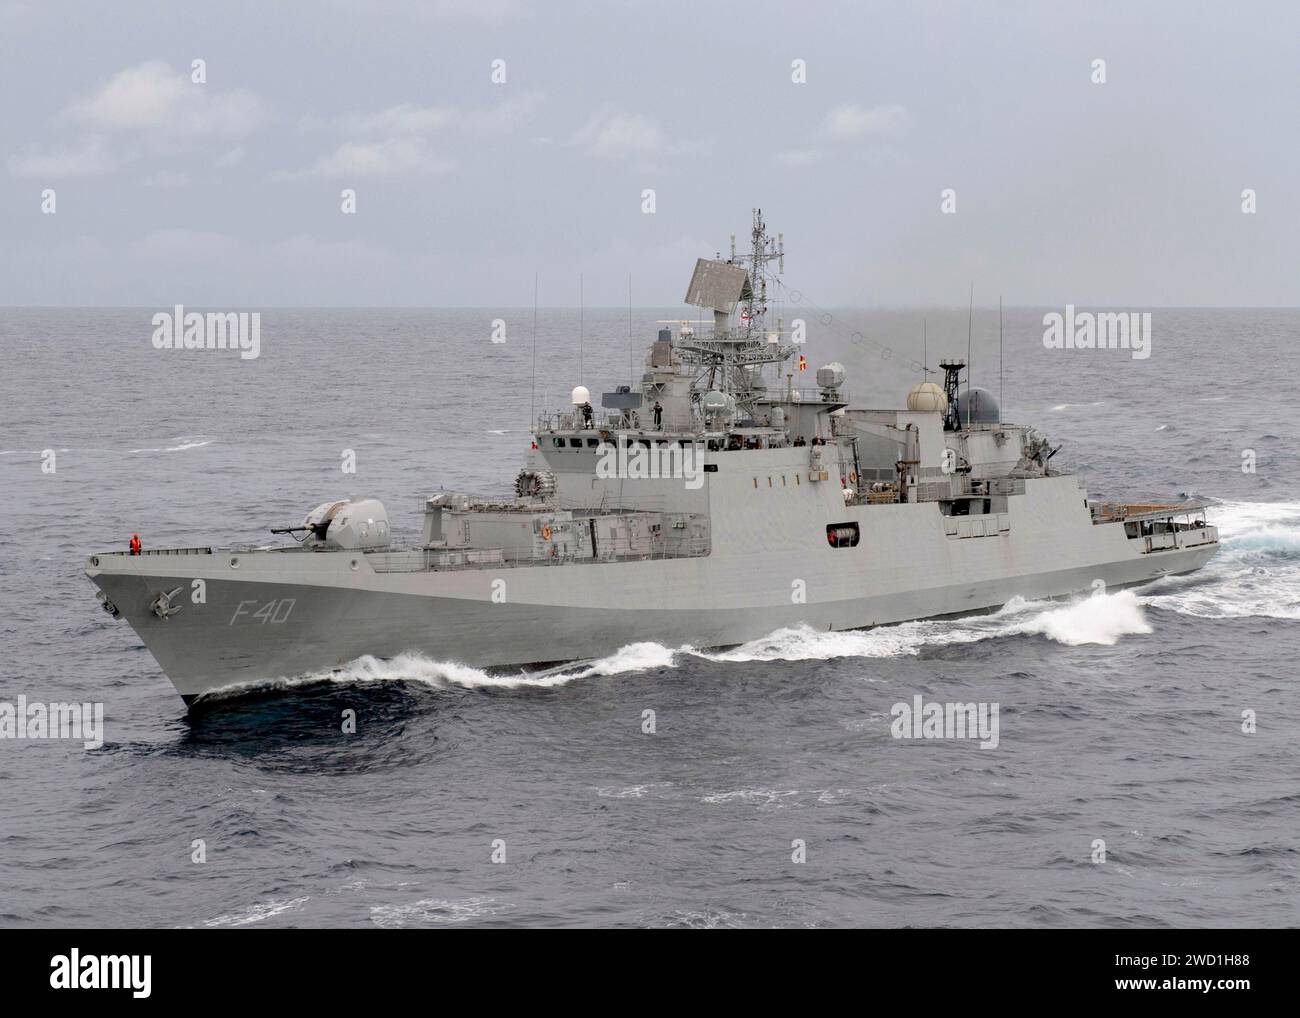 The Indian Navy frigate INS Talwar in the north Arabian Sea. Stock Photo